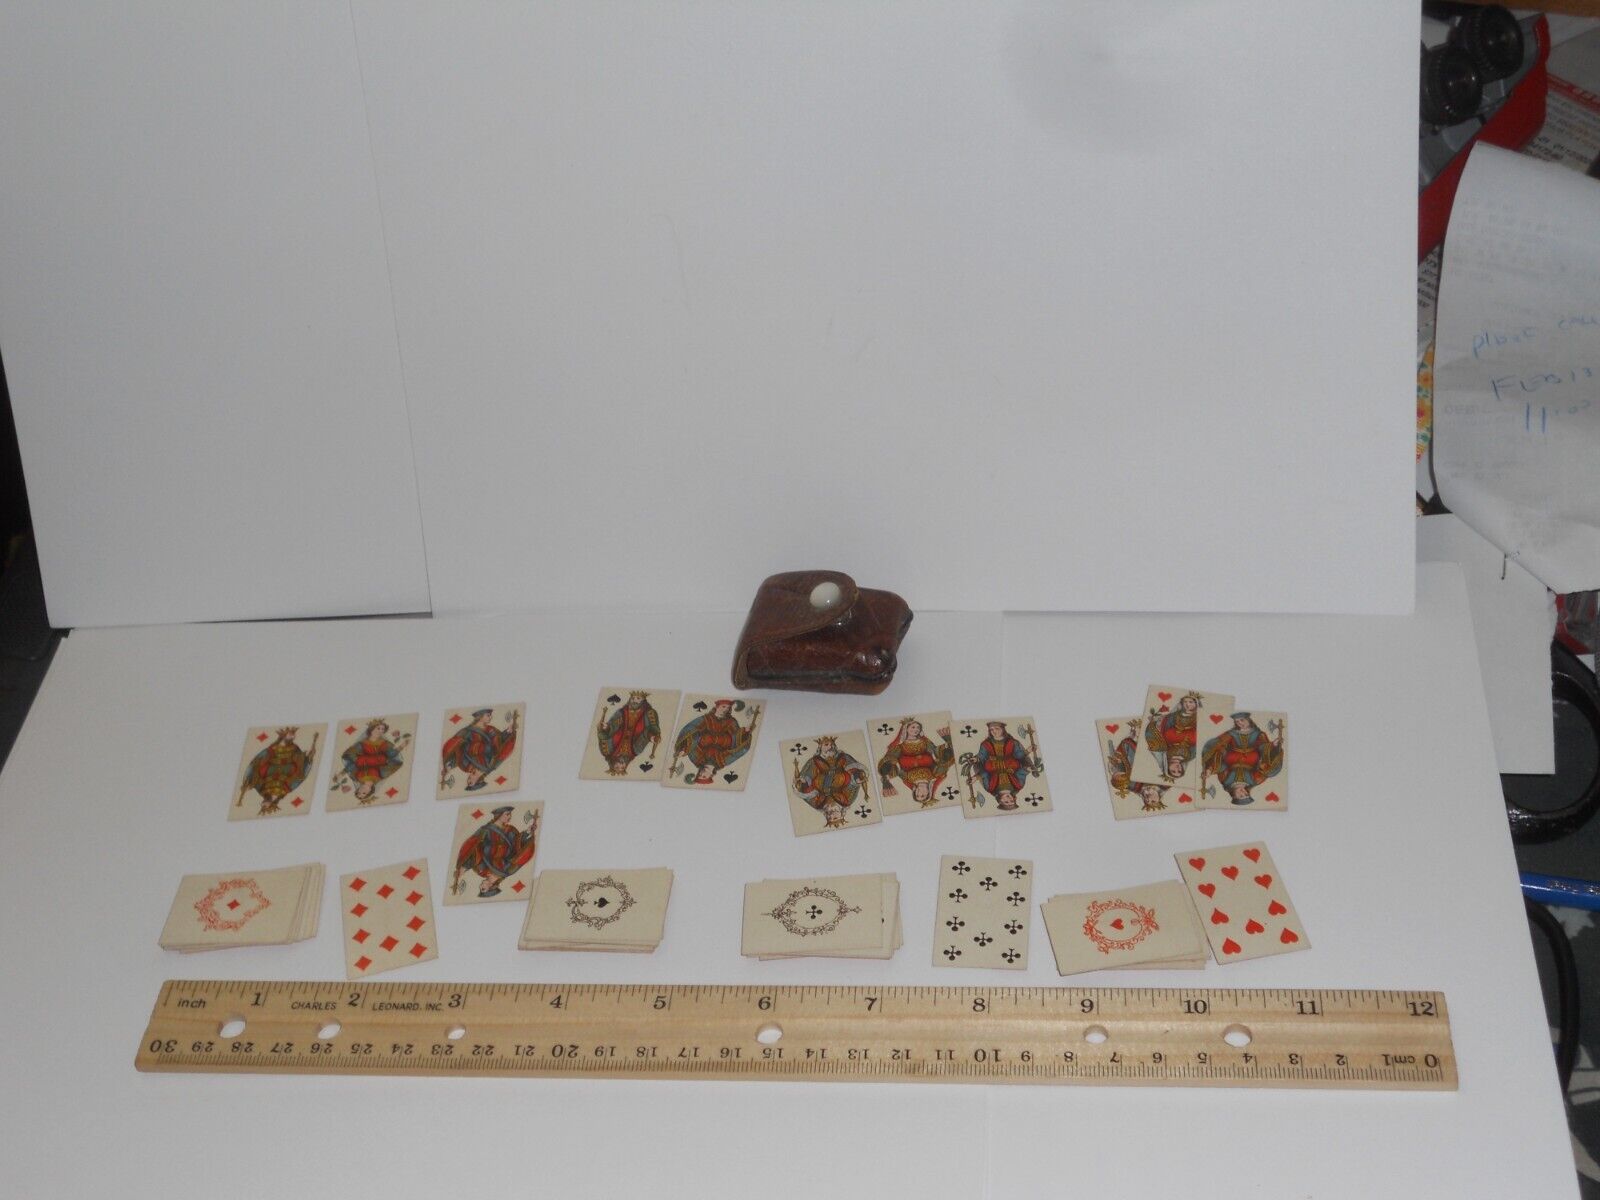 ANTIQUE PRE 1930s MINI PLAYING CARD DECK W/O NUMBERS LETTERS IN LEATHER CASE